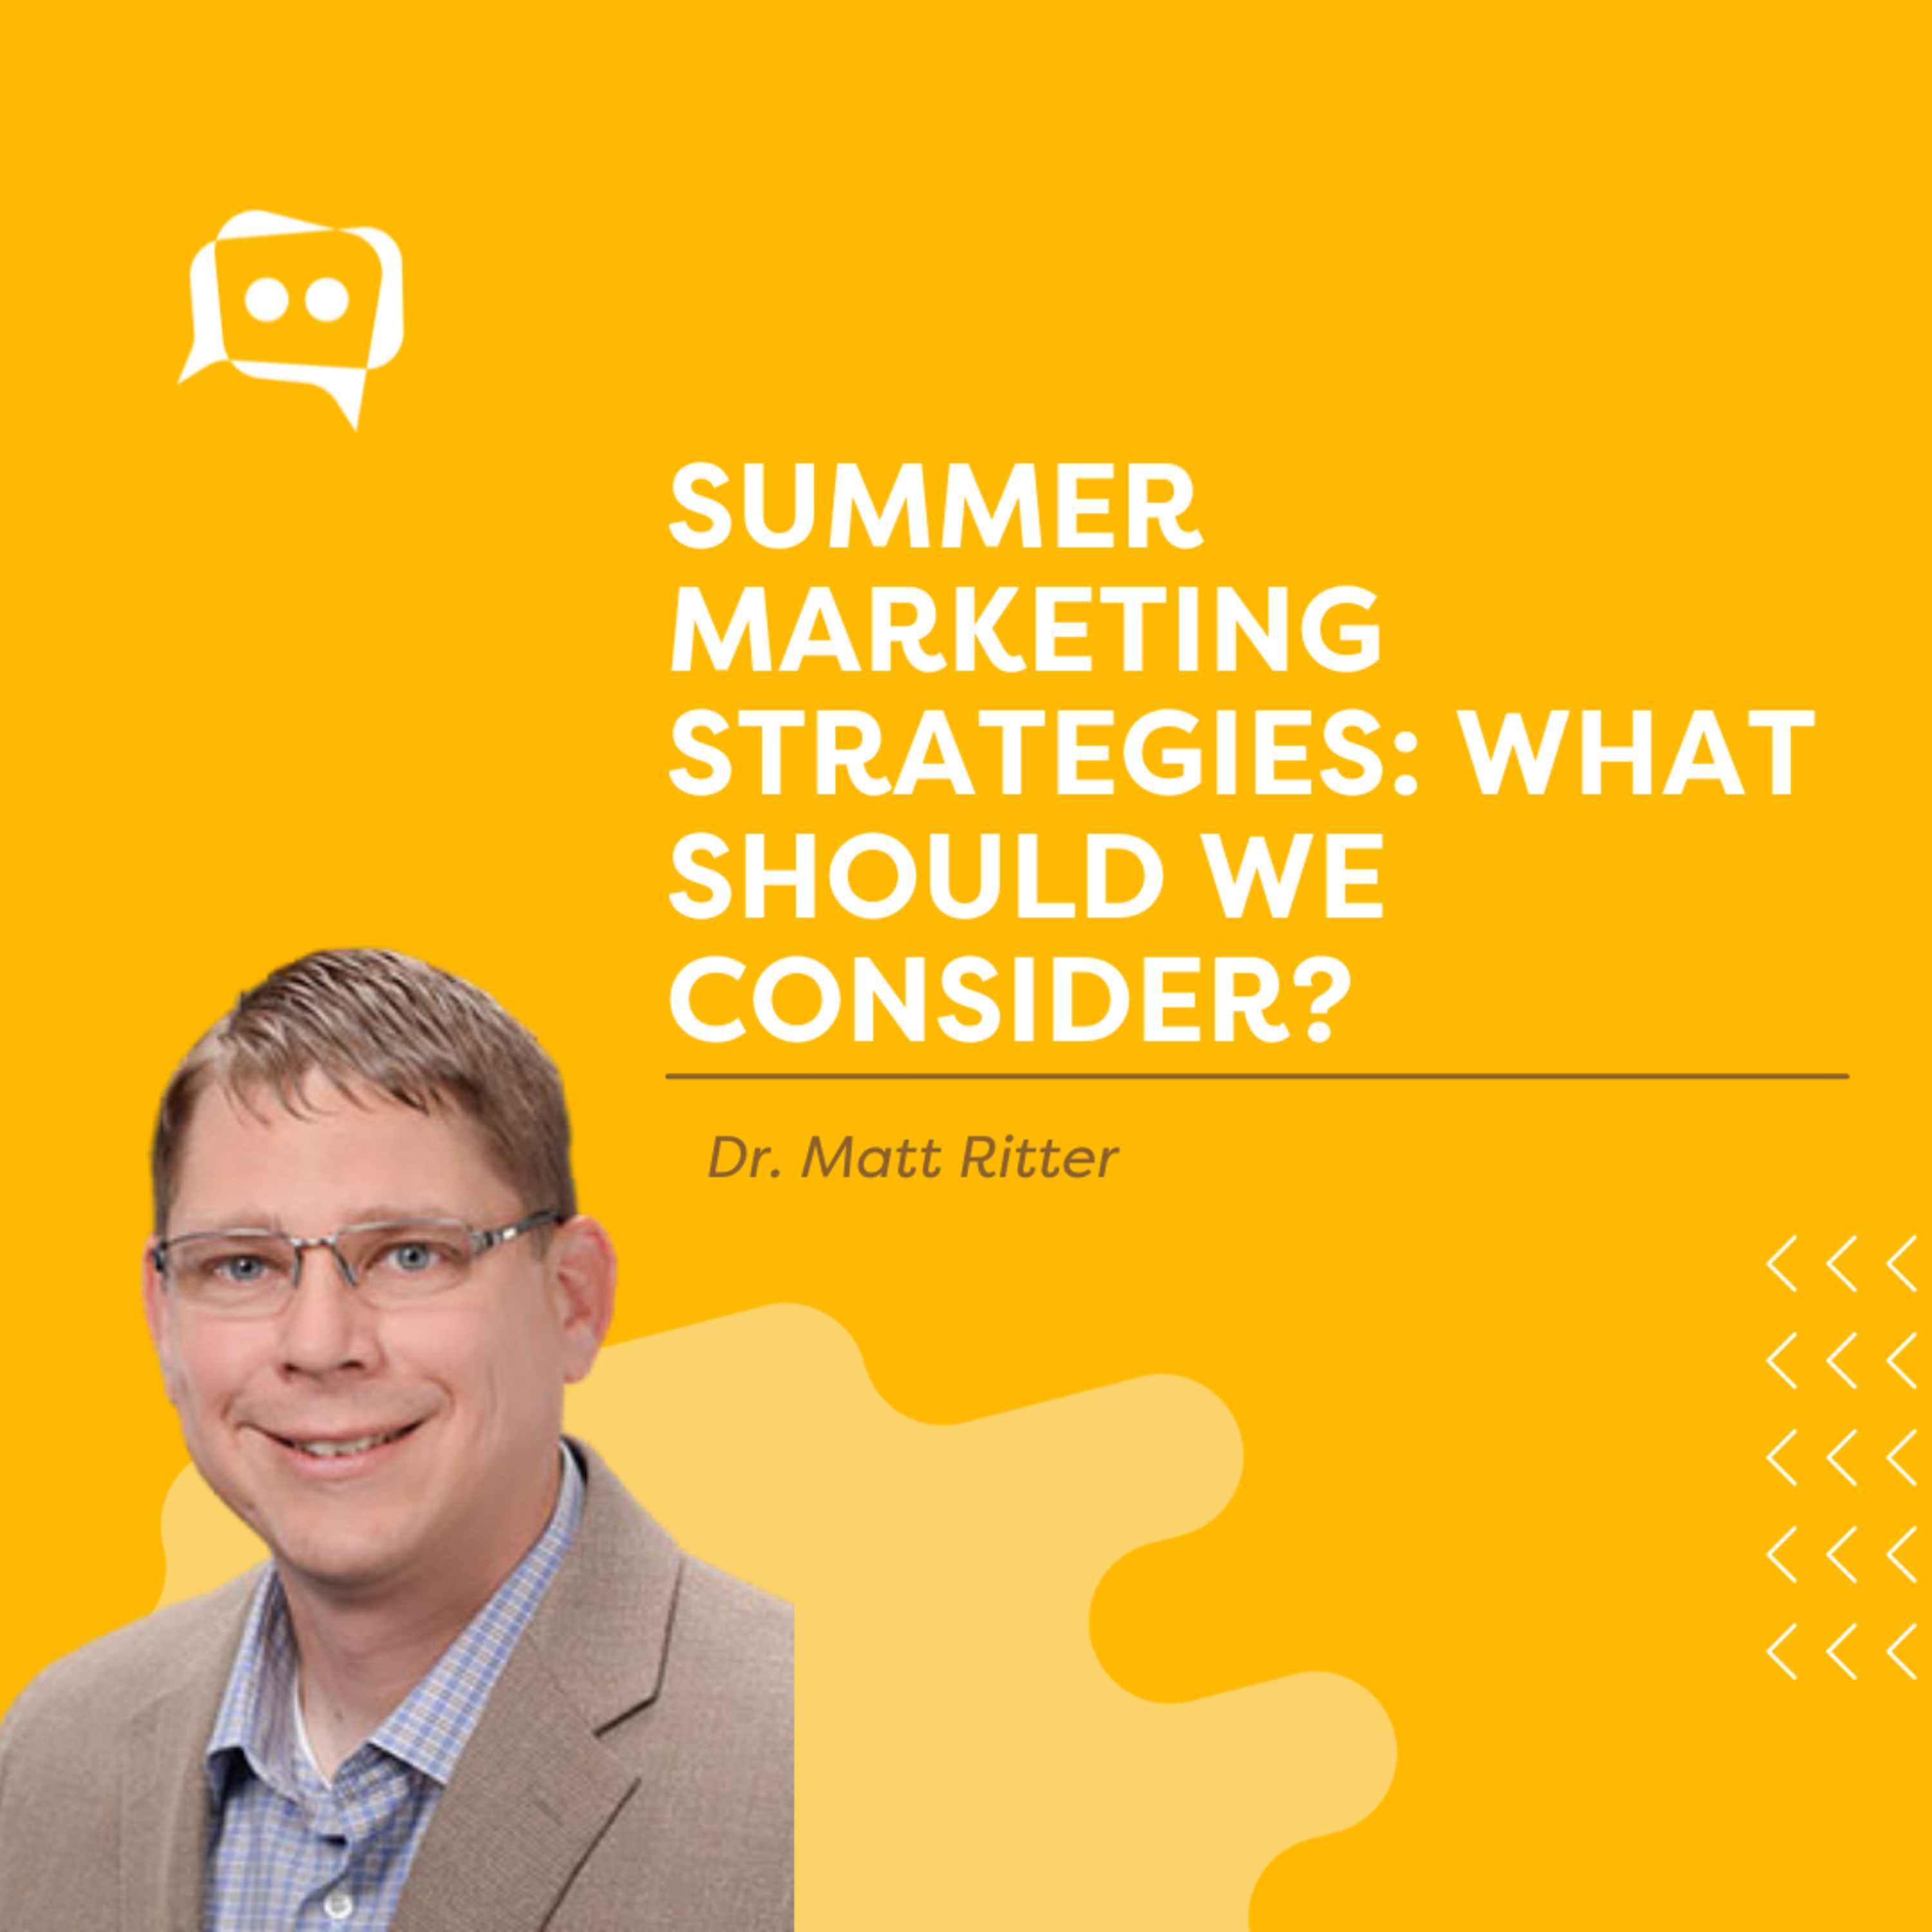 #SHORTS: Summer marketing strategies: what should we consider? With Dr. Matt Ritter